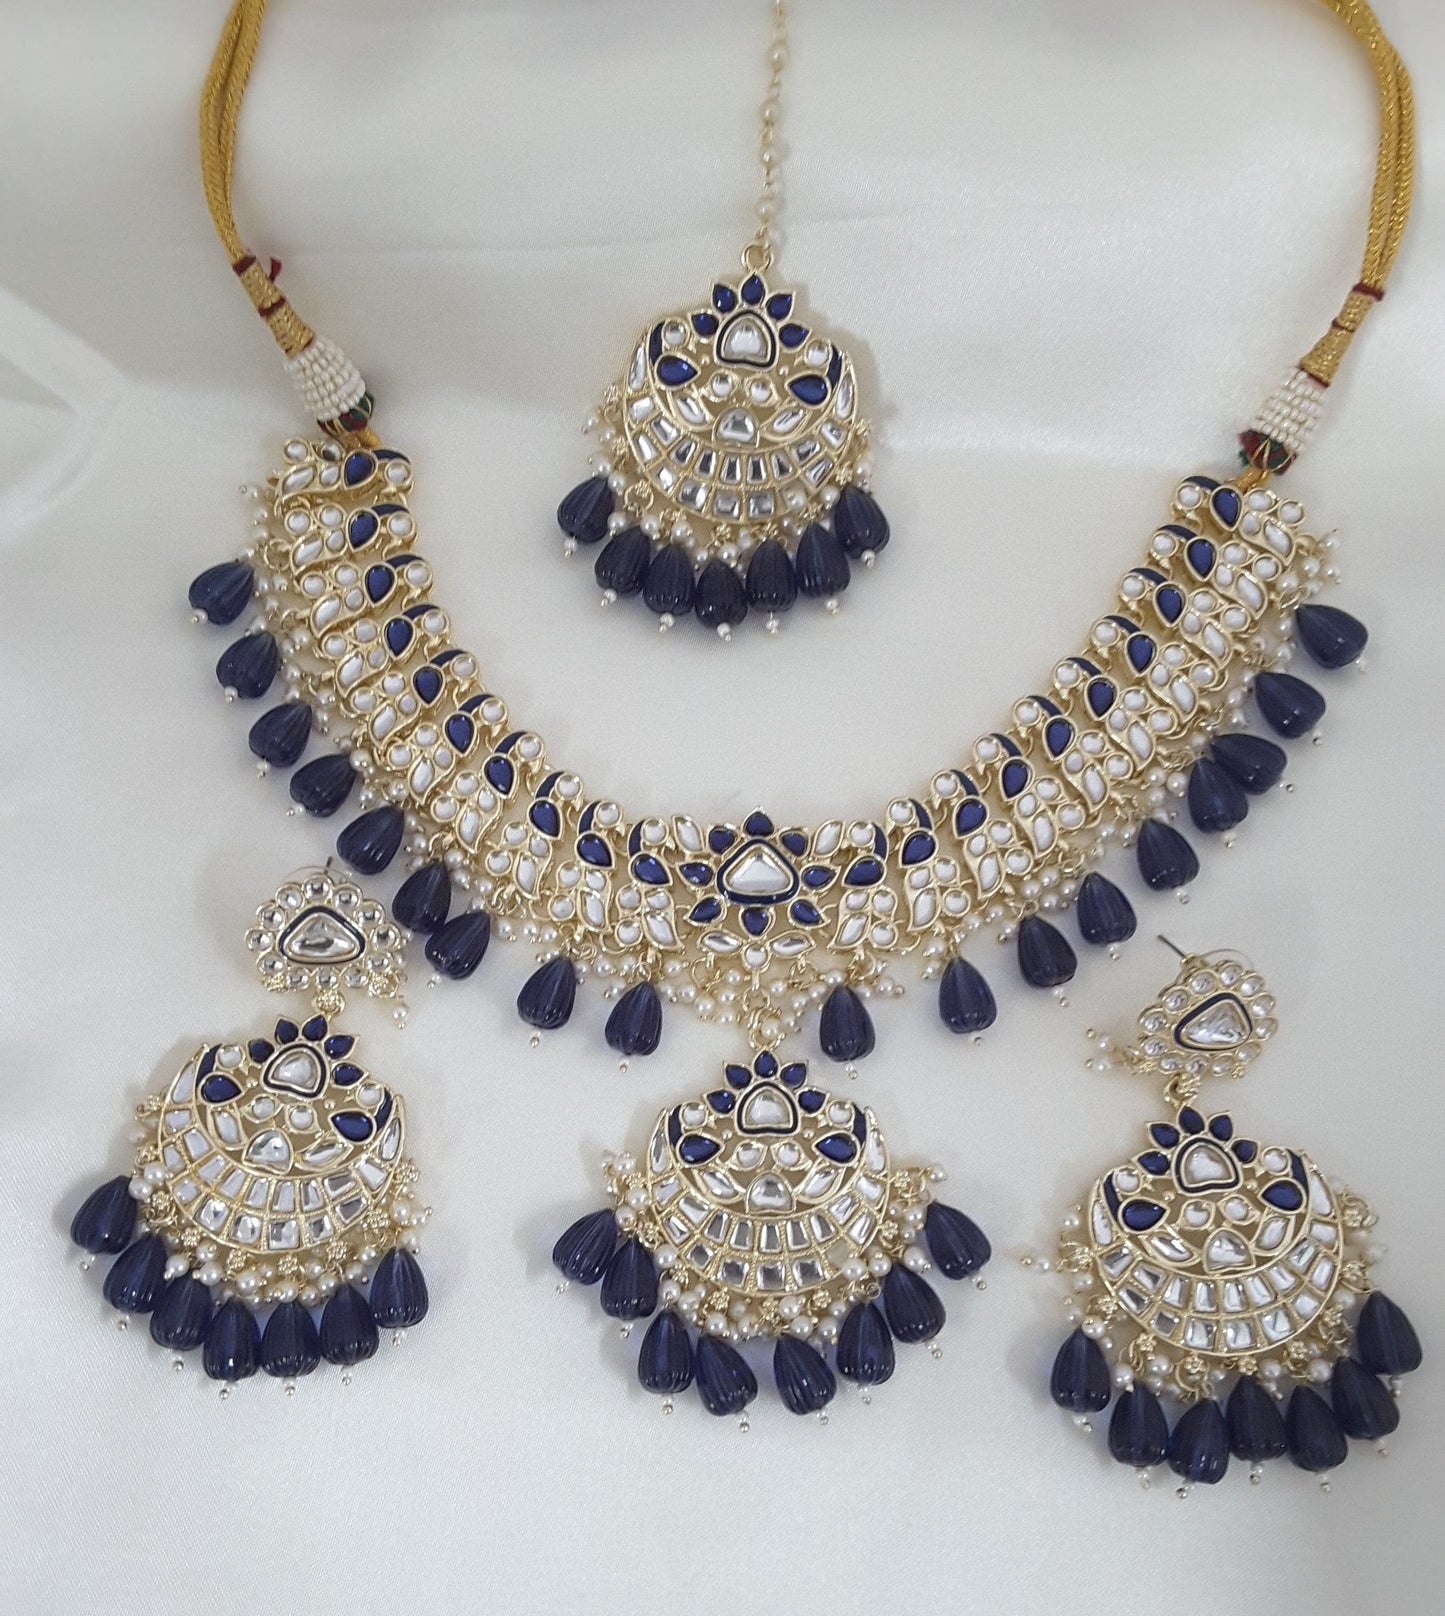 Moonstruck Traditional Indian Peacock Design White Kundan and Blue Beads Choker Necklace Earring Set with Maang tikka for Women(Blue) - www.MoonstruckINC.com